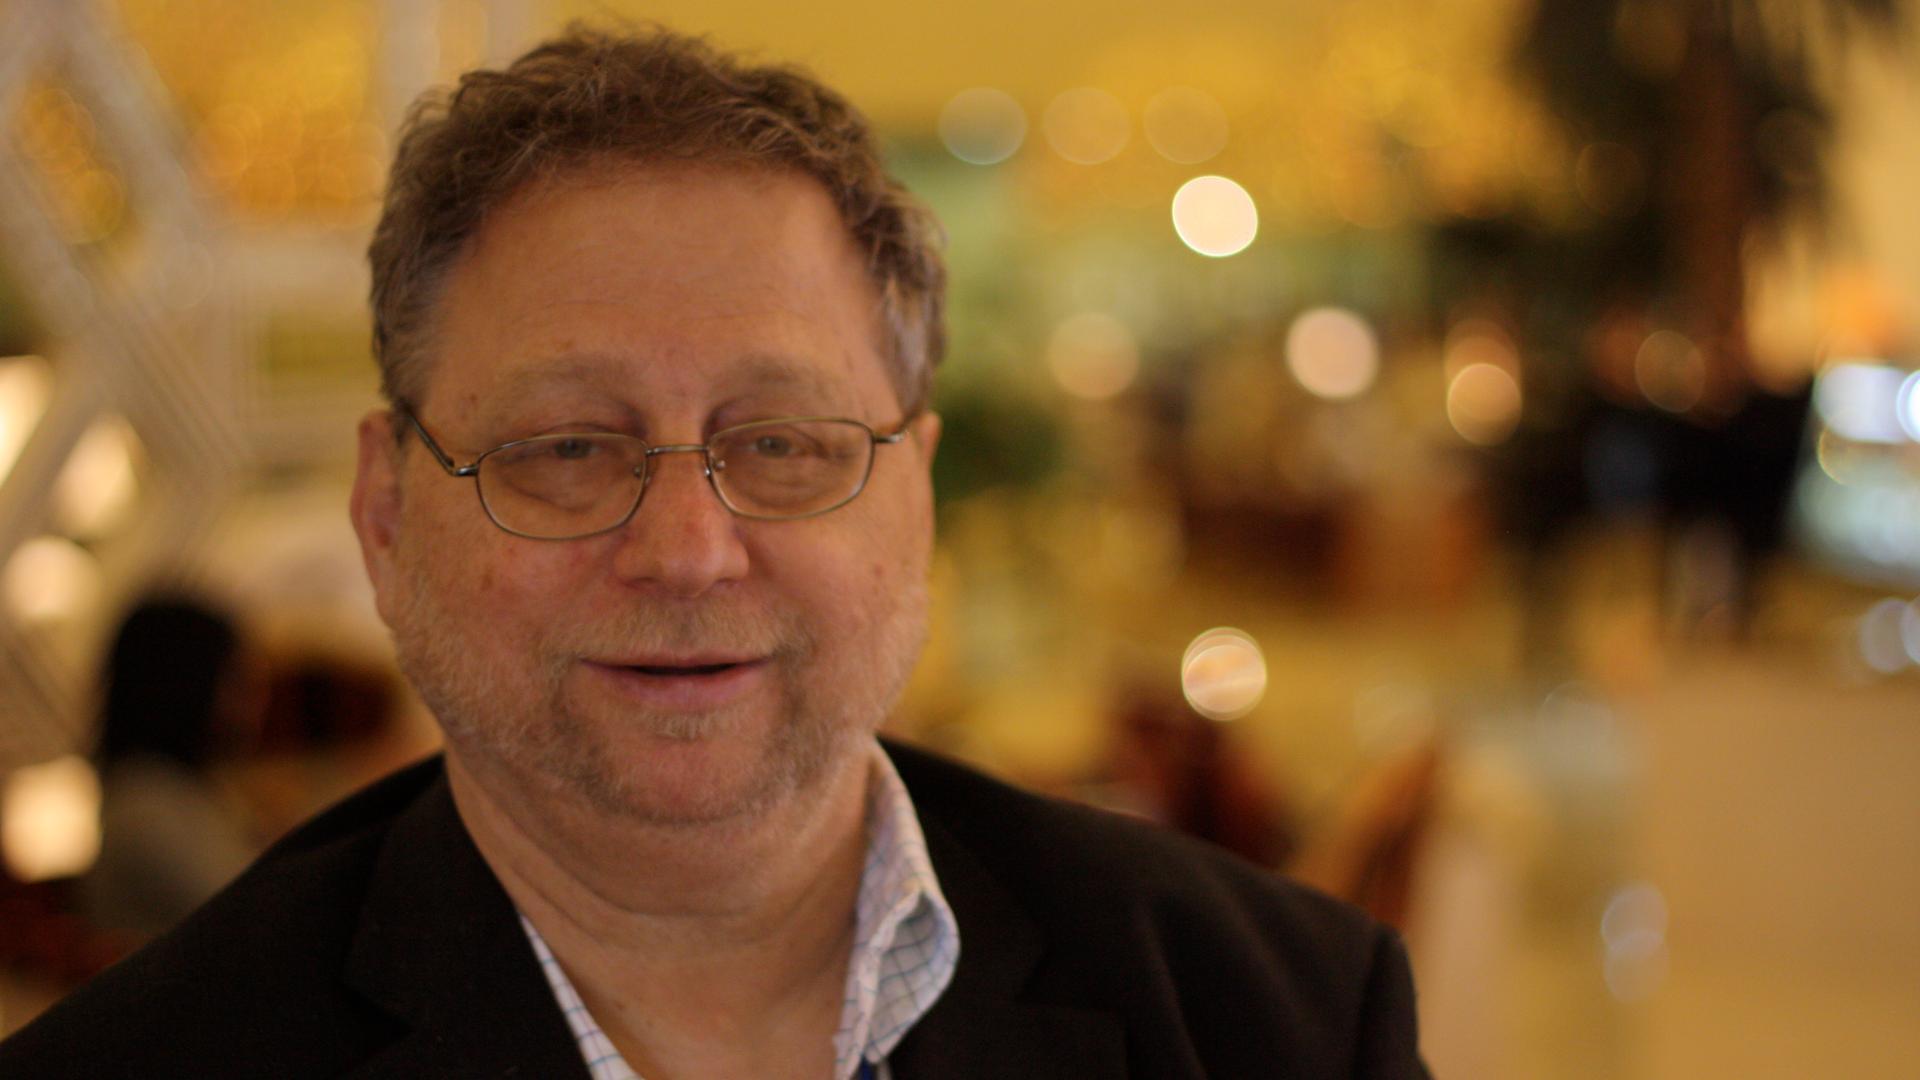 Danny Schechter—journalist, author, activist, social critic, Emmy-winning TV producer and "News Dissector" at Boston's WBCN-FM in the early 1970s—died March 19 of pancreatic cancer at the age of 72.